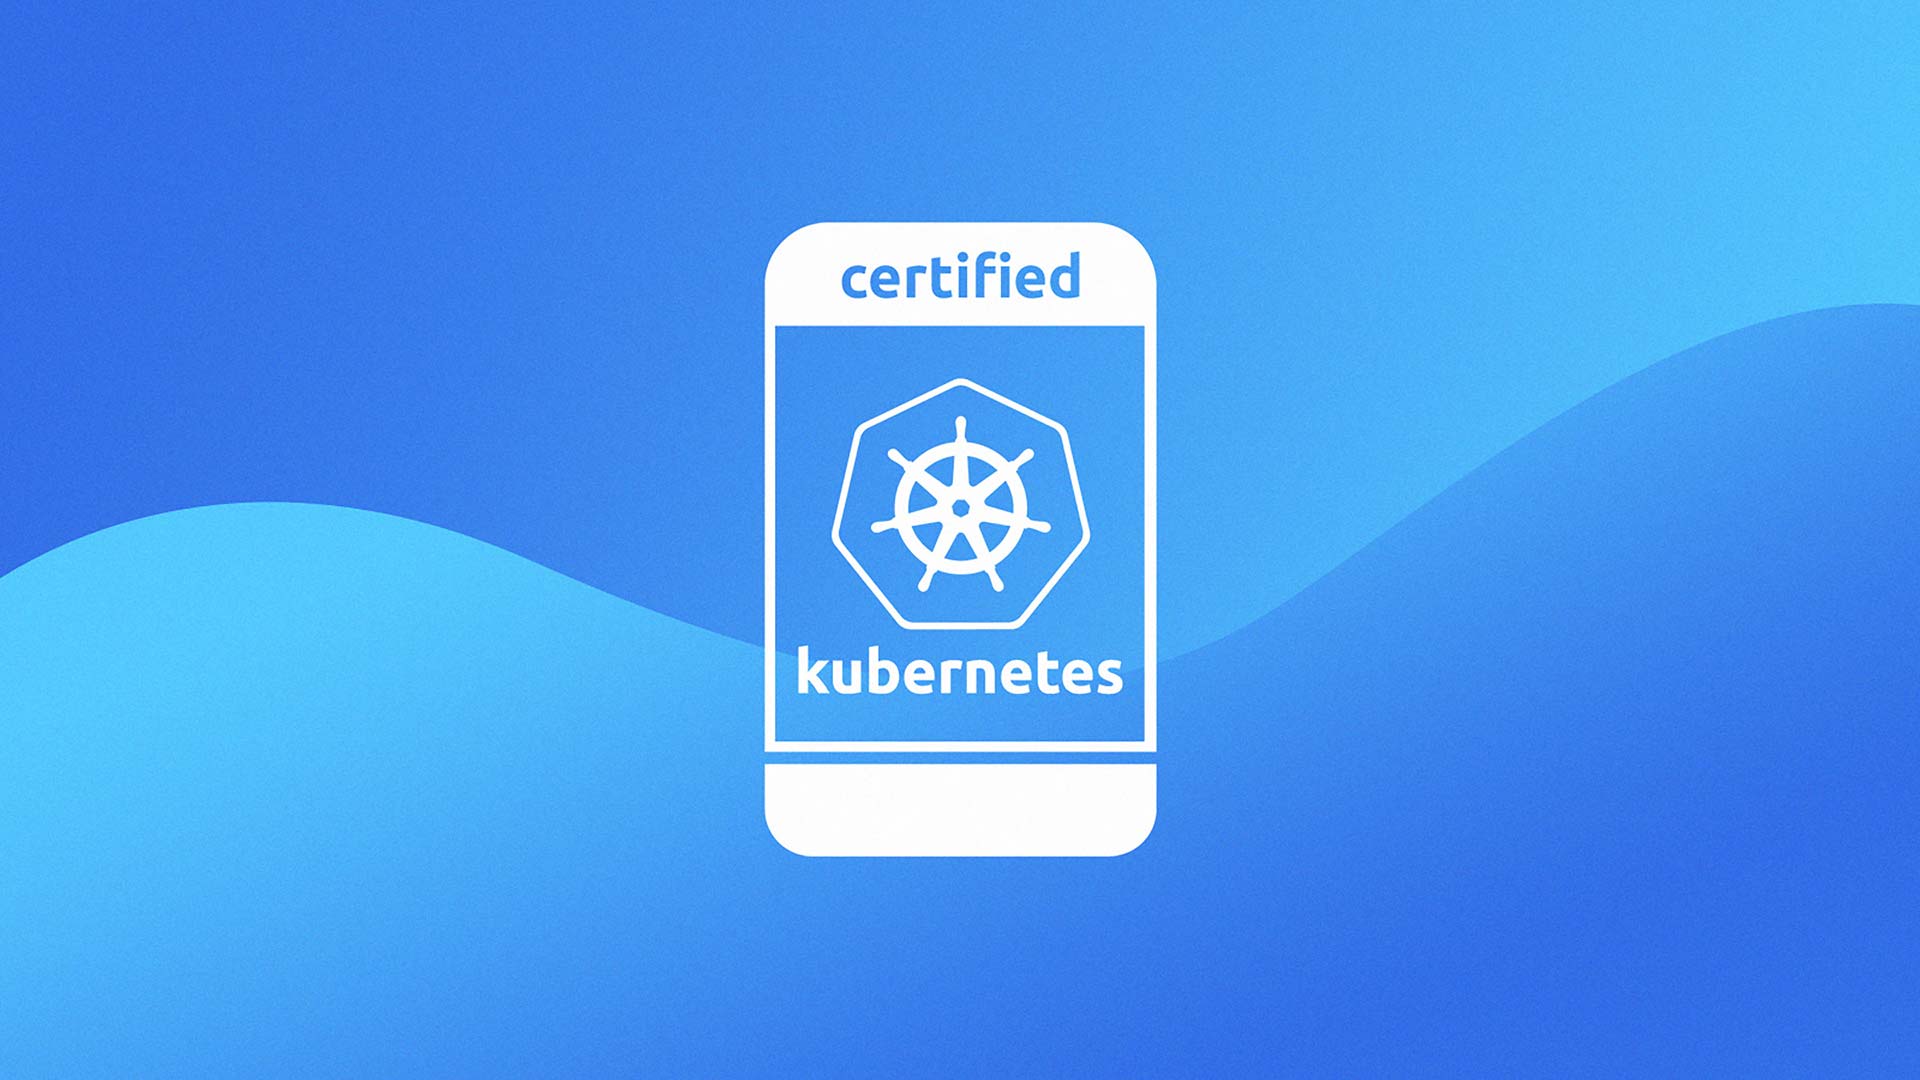 New Evergreen Release of Kubernetes 1.9.4 on DC/OS